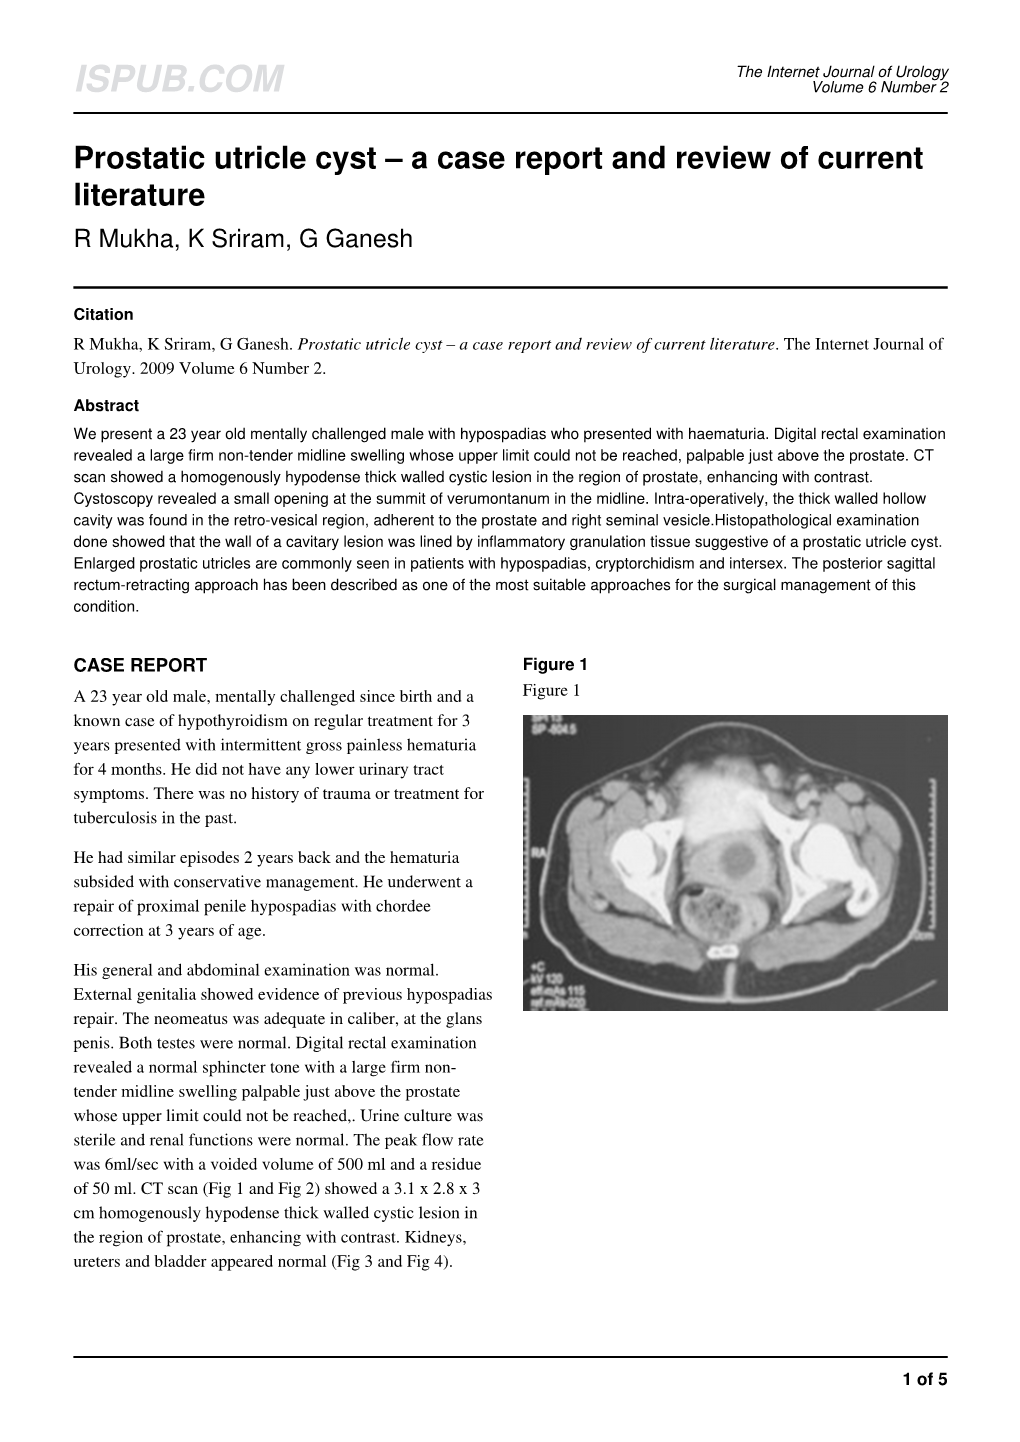 Prostatic Utricle Cyst – a Case Report and Review of Current Literature R Mukha, K Sriram, G Ganesh